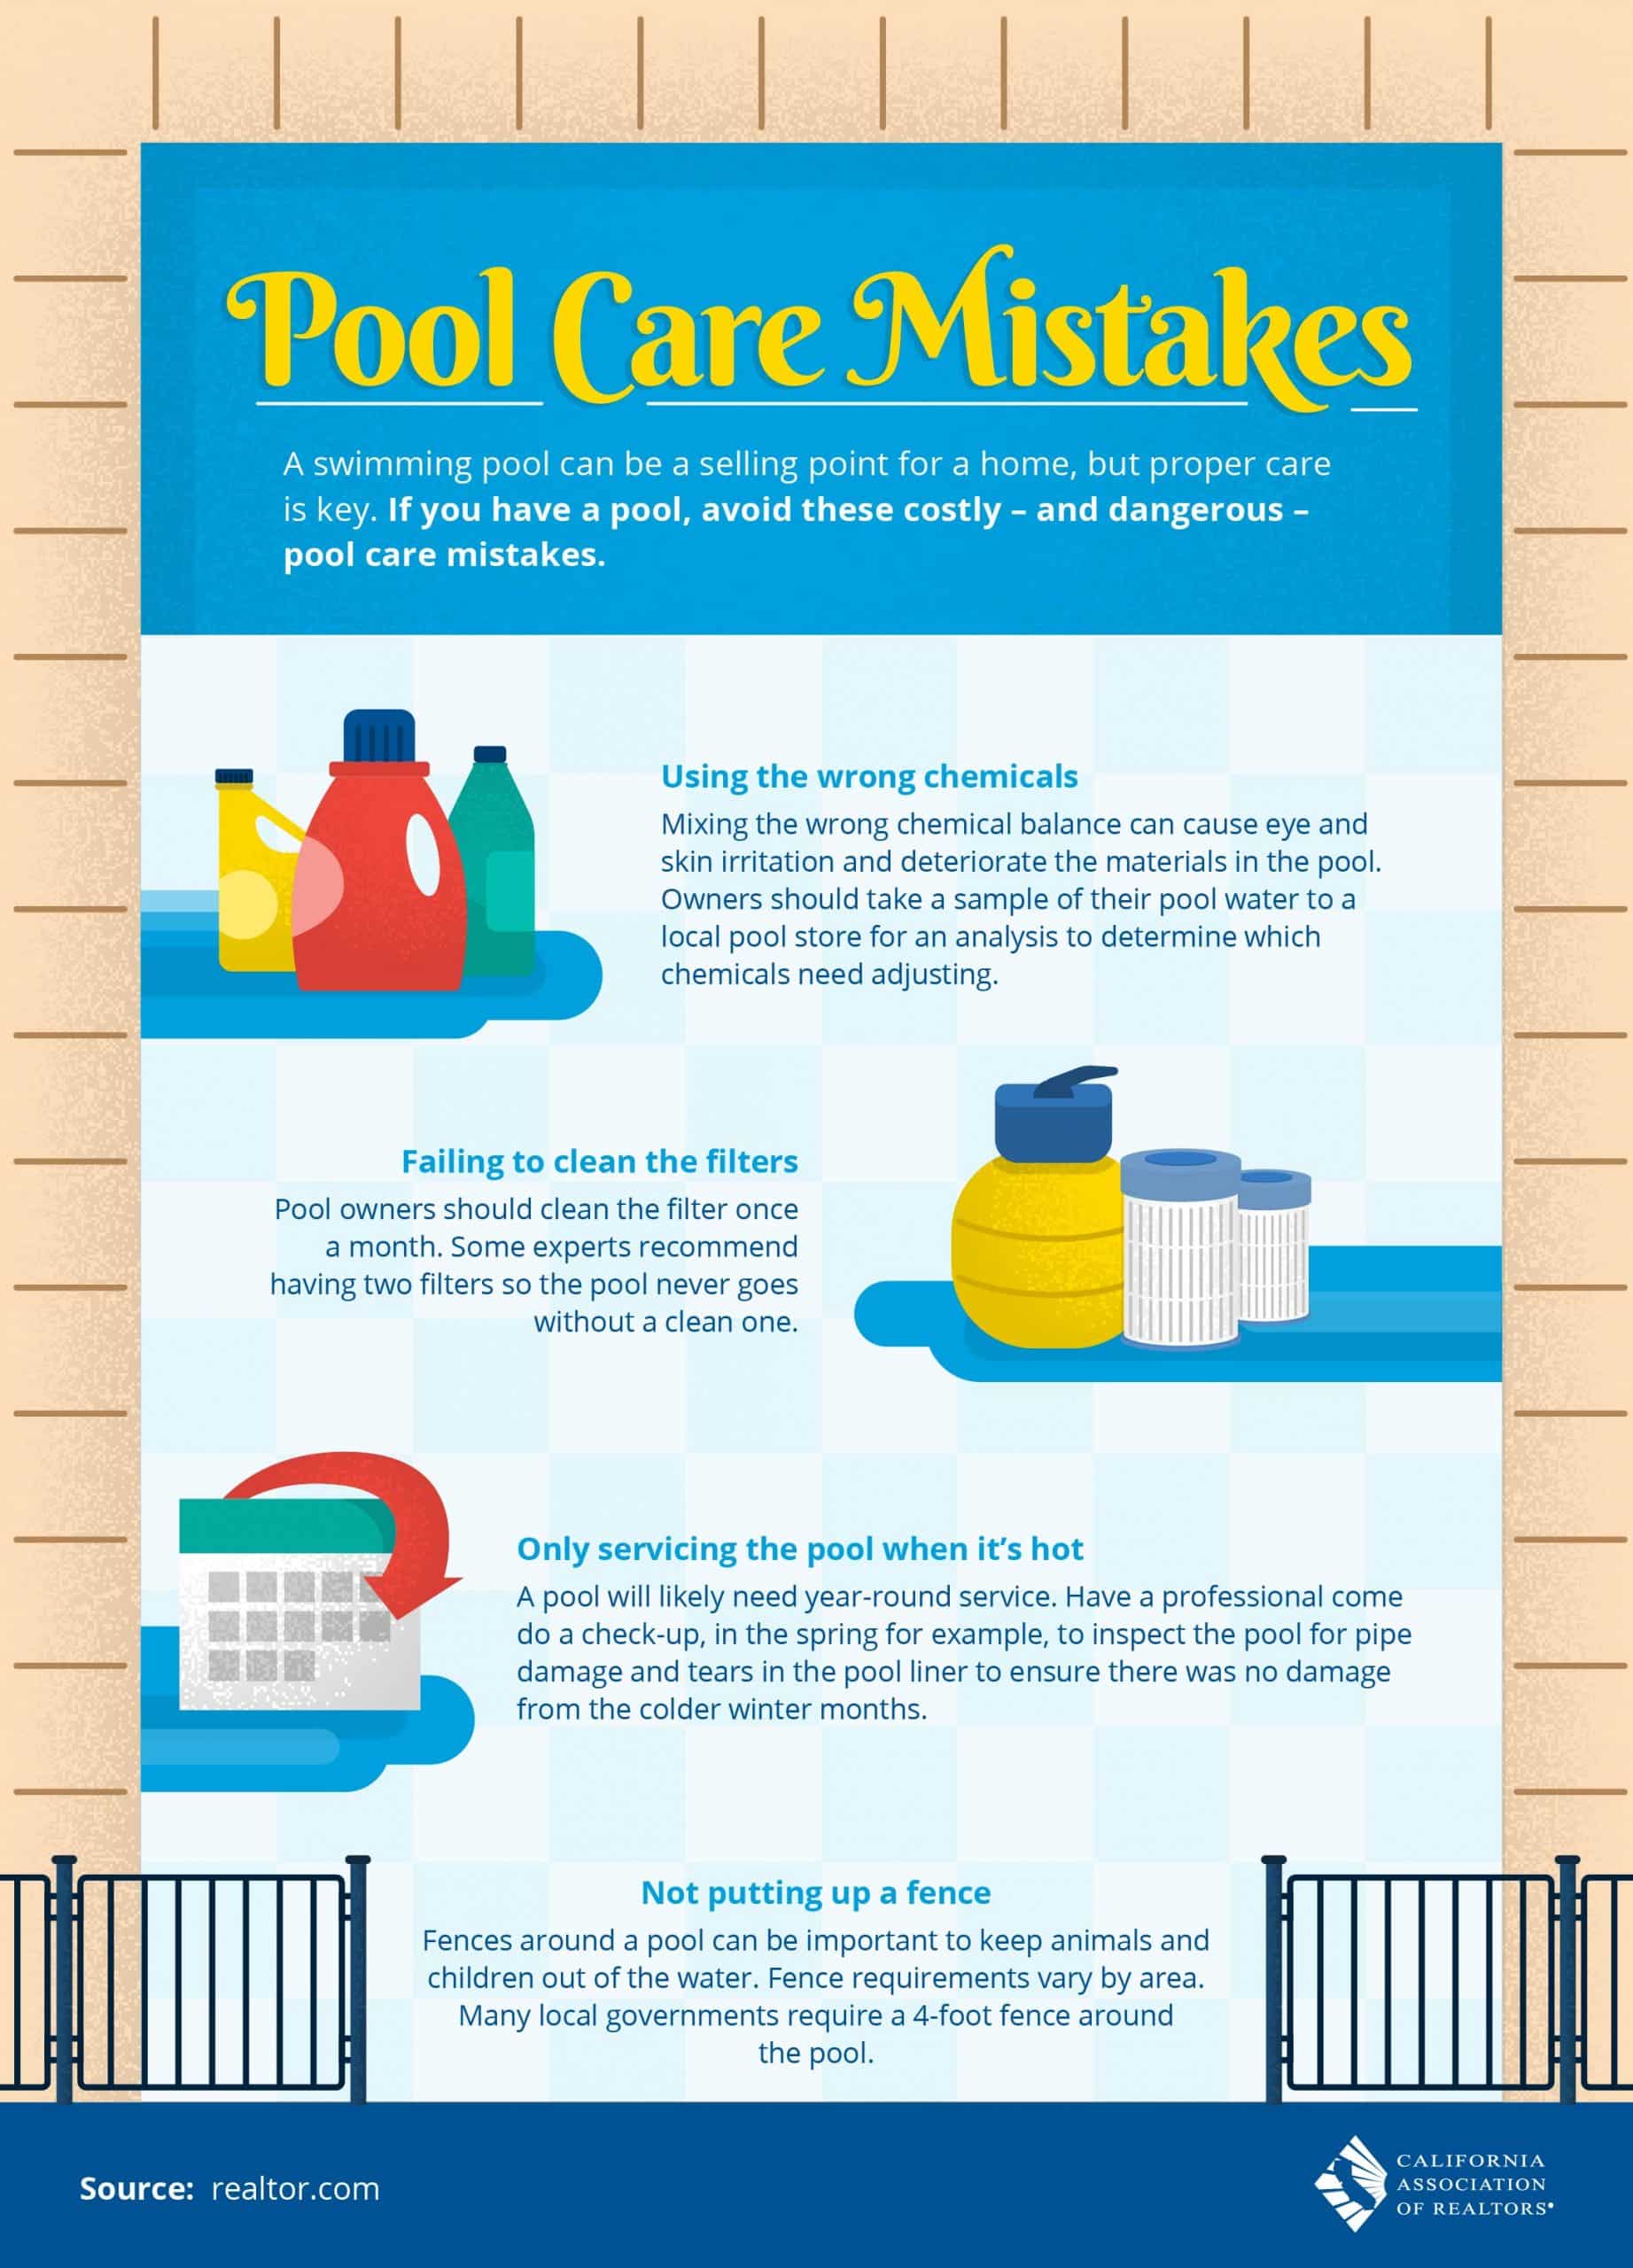 Pool Care Mistakes